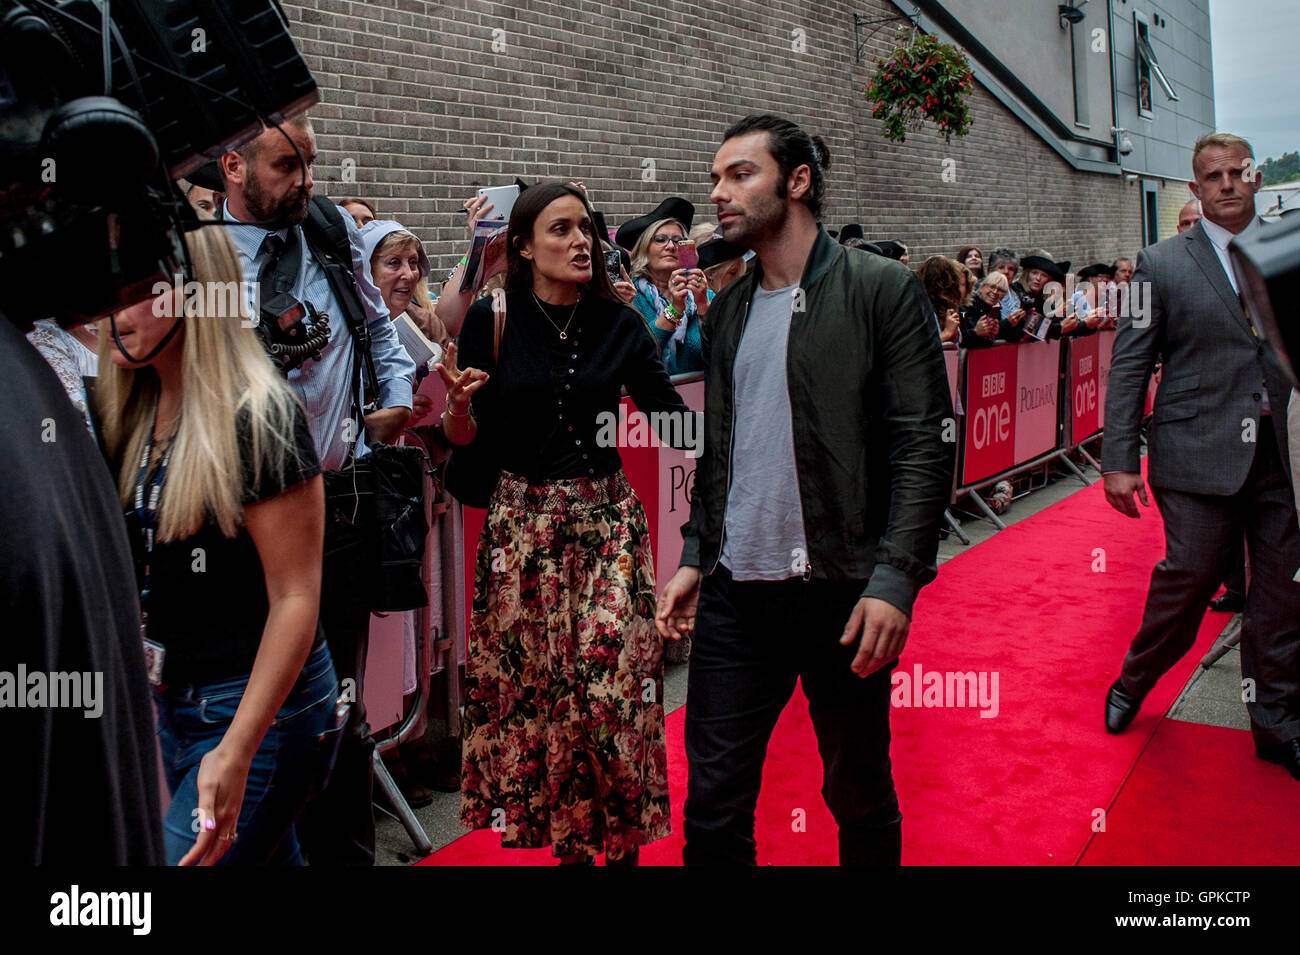 St Austell, Cornwall, UK. 4th September, 2016. POLDARK SERIES 2 PREMIER. Aidan Turner and Eleanor Tomlinson at the premiere screening of the hit series by BBC ONE of Poldark at the White River Cinema, St Austell, Cornwall, 4 September, 2016. Credit: MPAK/Alamy Live News Stock Photo